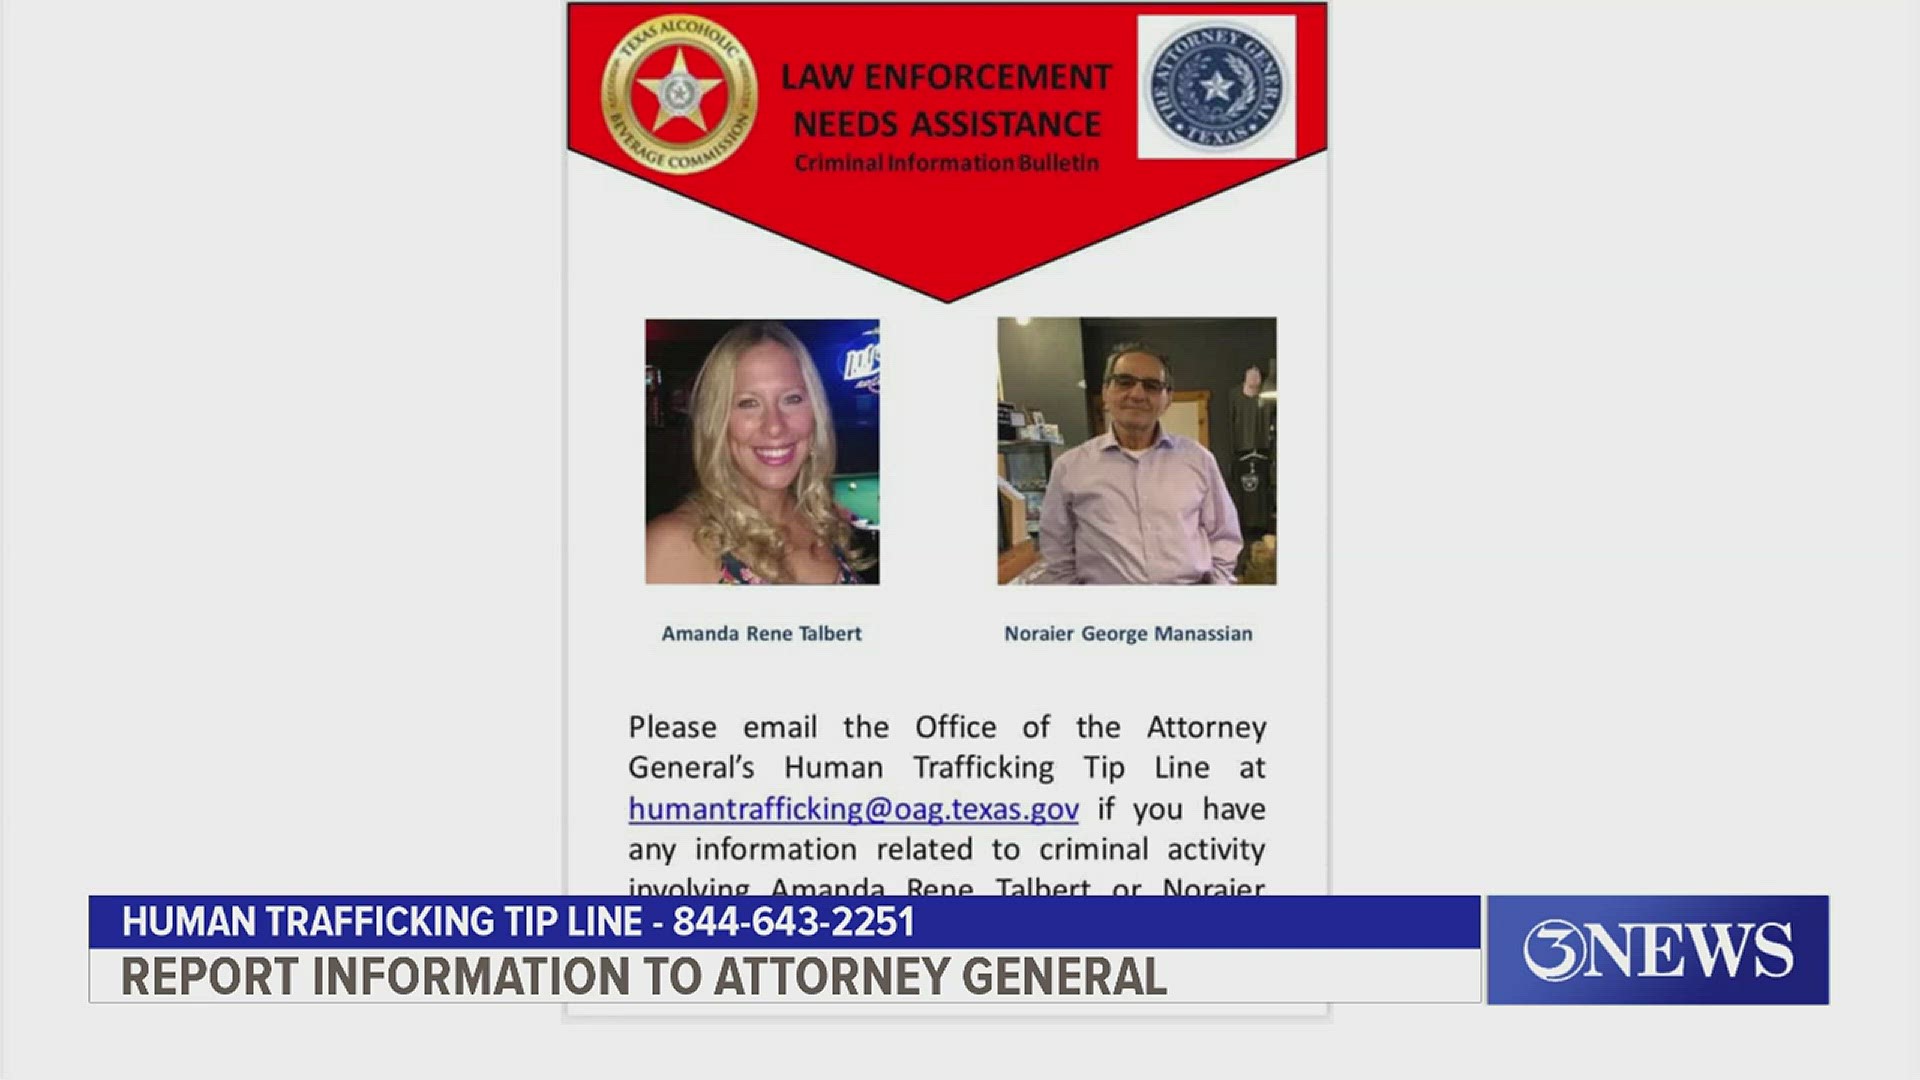 If you have any information about Amanda Talbert or Noraier Manassian you are urged to call the Attorney General's Human Trafficking TIP line 844-643-2251.